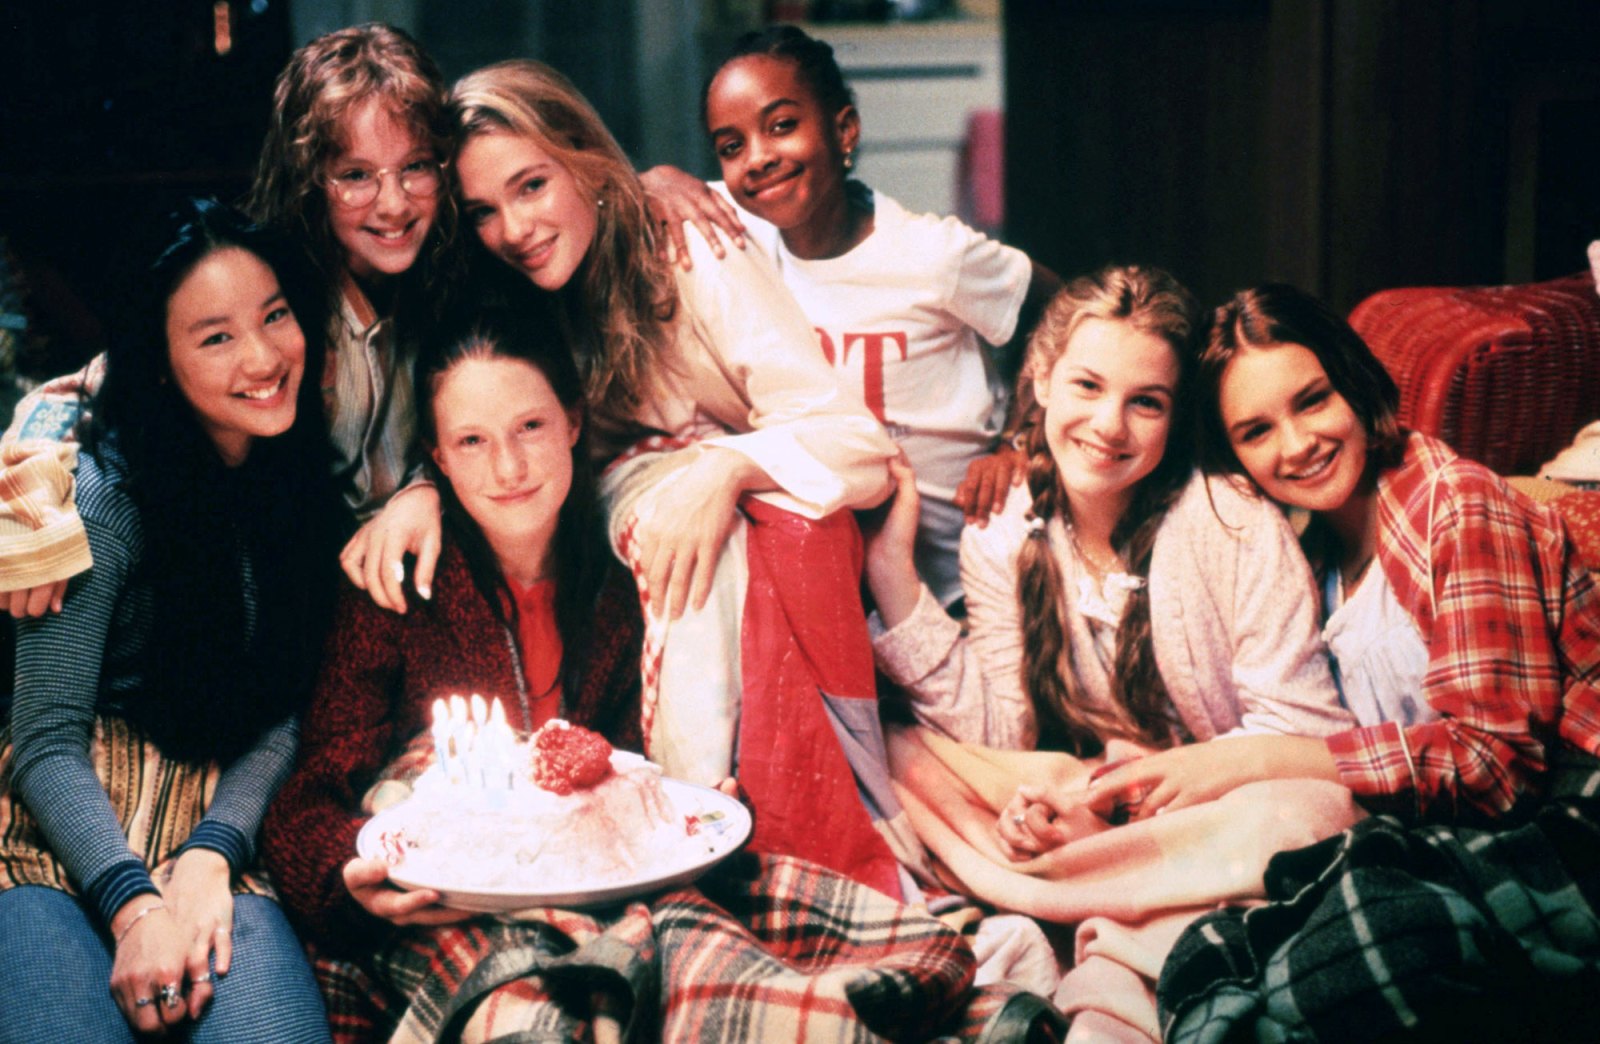 ‘Baby-Sitter's Club’ 1995 Movie Cast: Where Are They Now? Schuyler Fisk, Rachael Leigh Cook and More